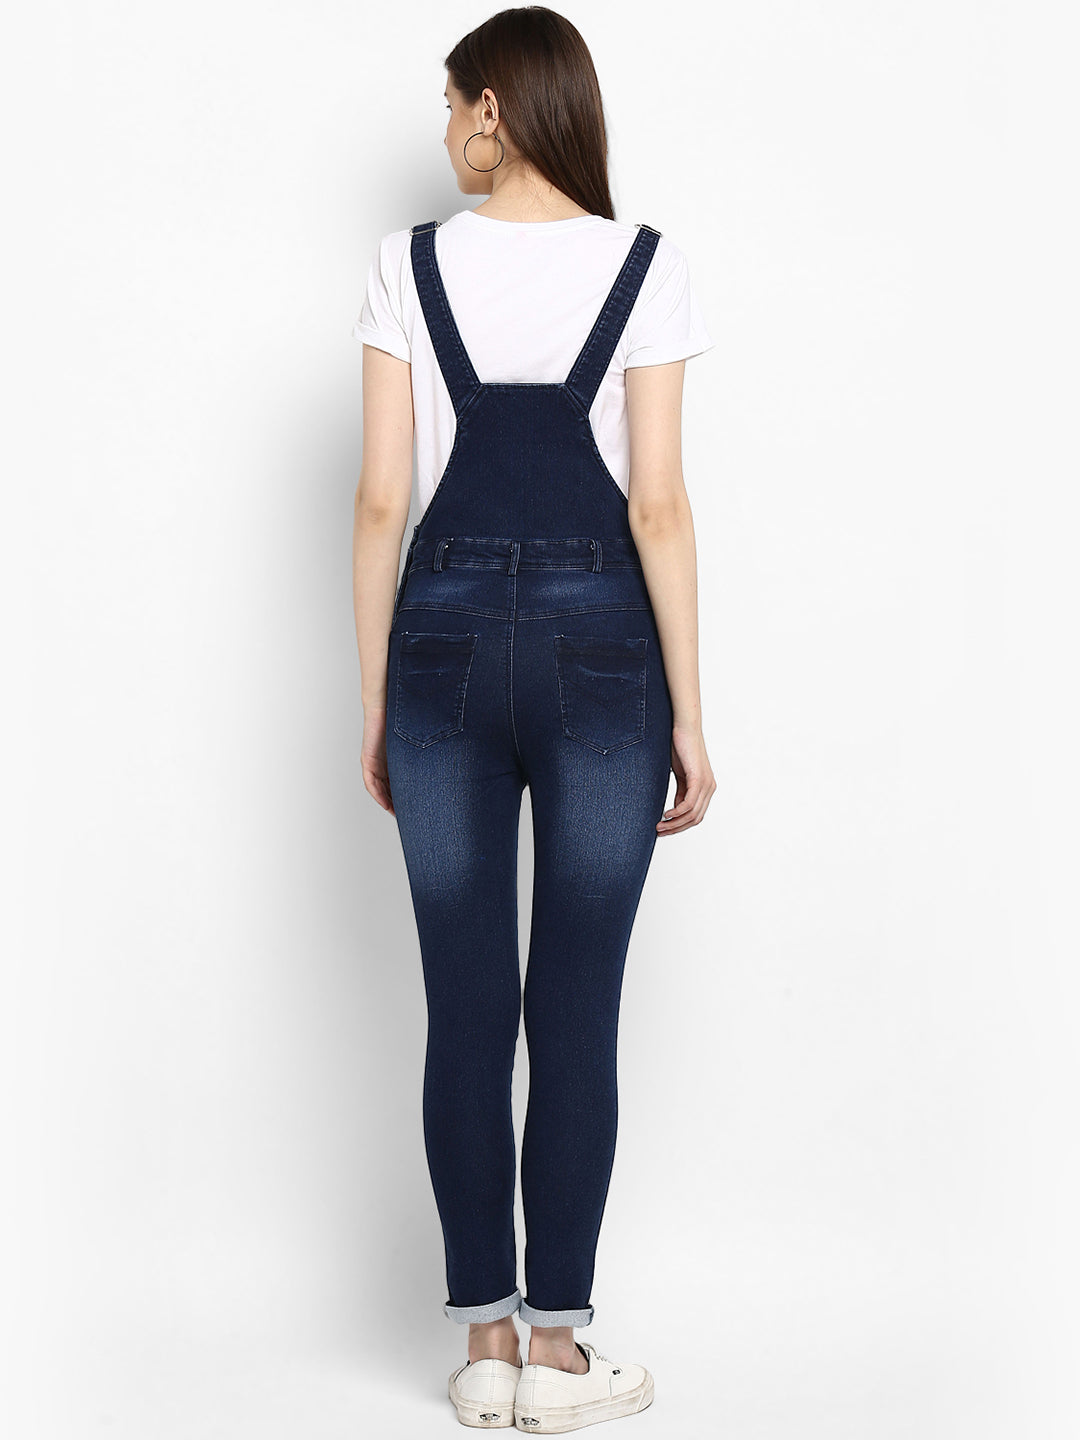 Women's Stretchable Denim Washed effect Capri Style Dungarees(inner not provided)